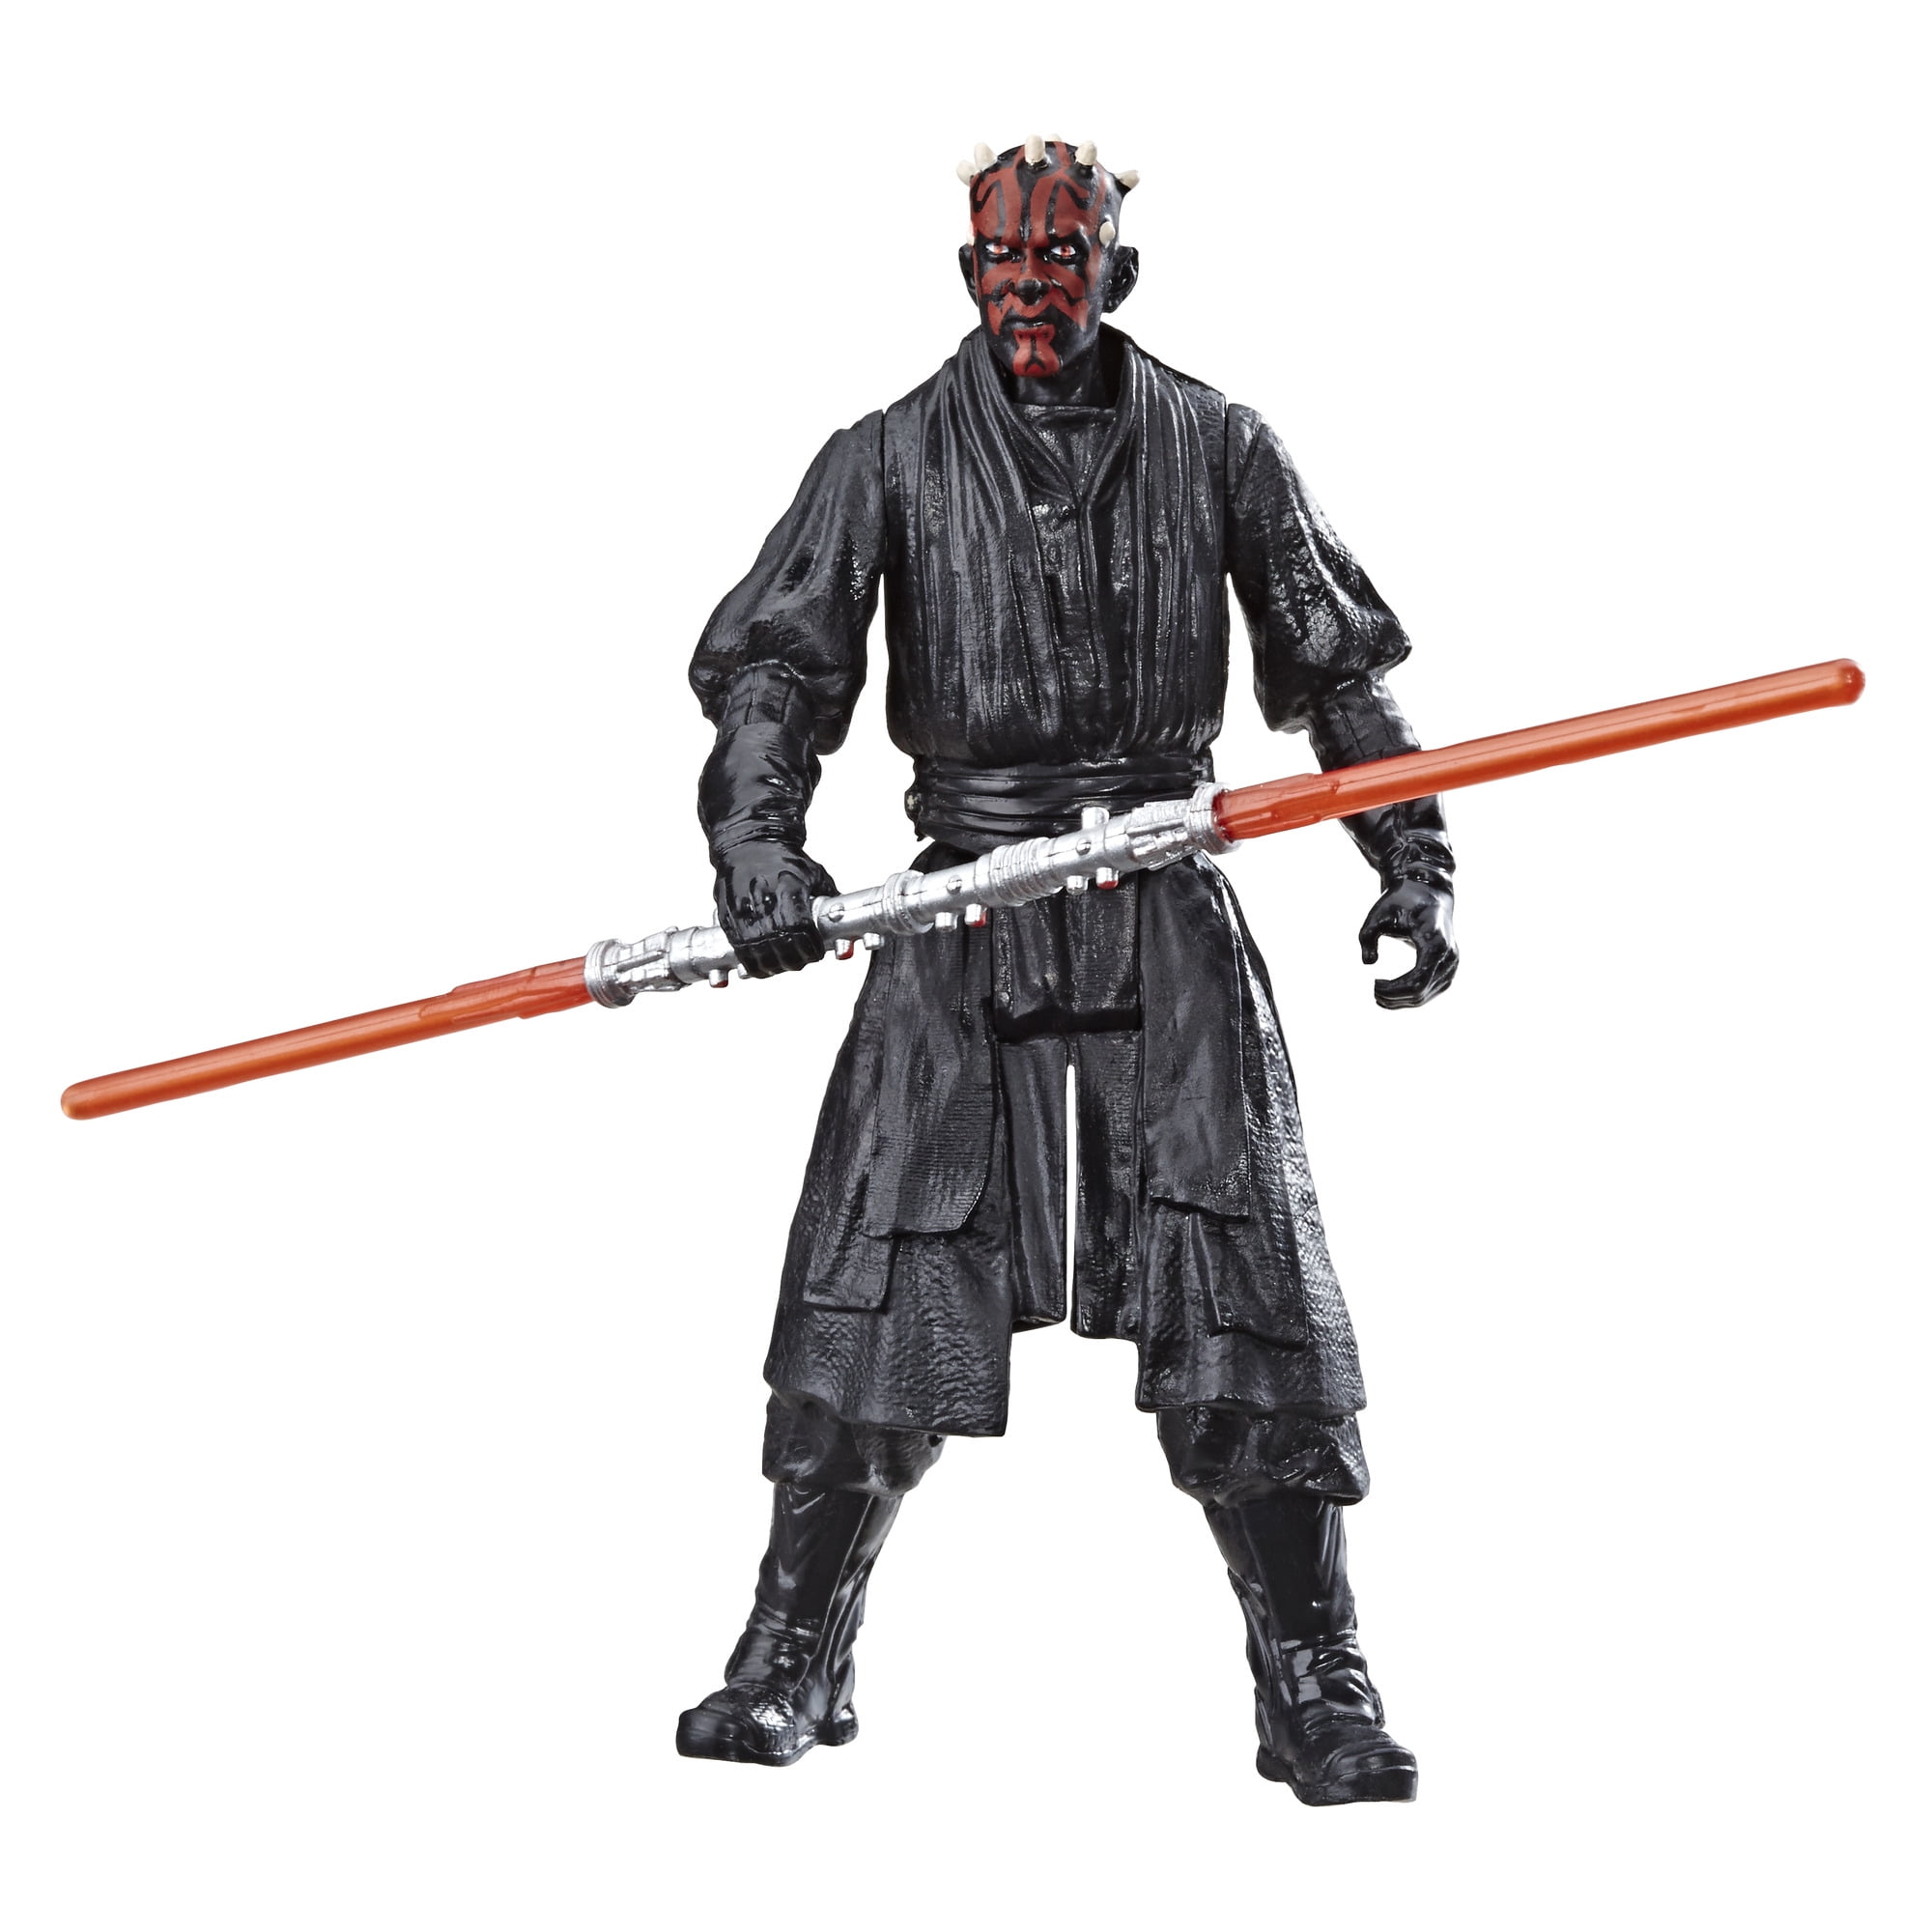 Star Wars Hero Series Darth Vader 12-inch Action Figure with Lightsaber 